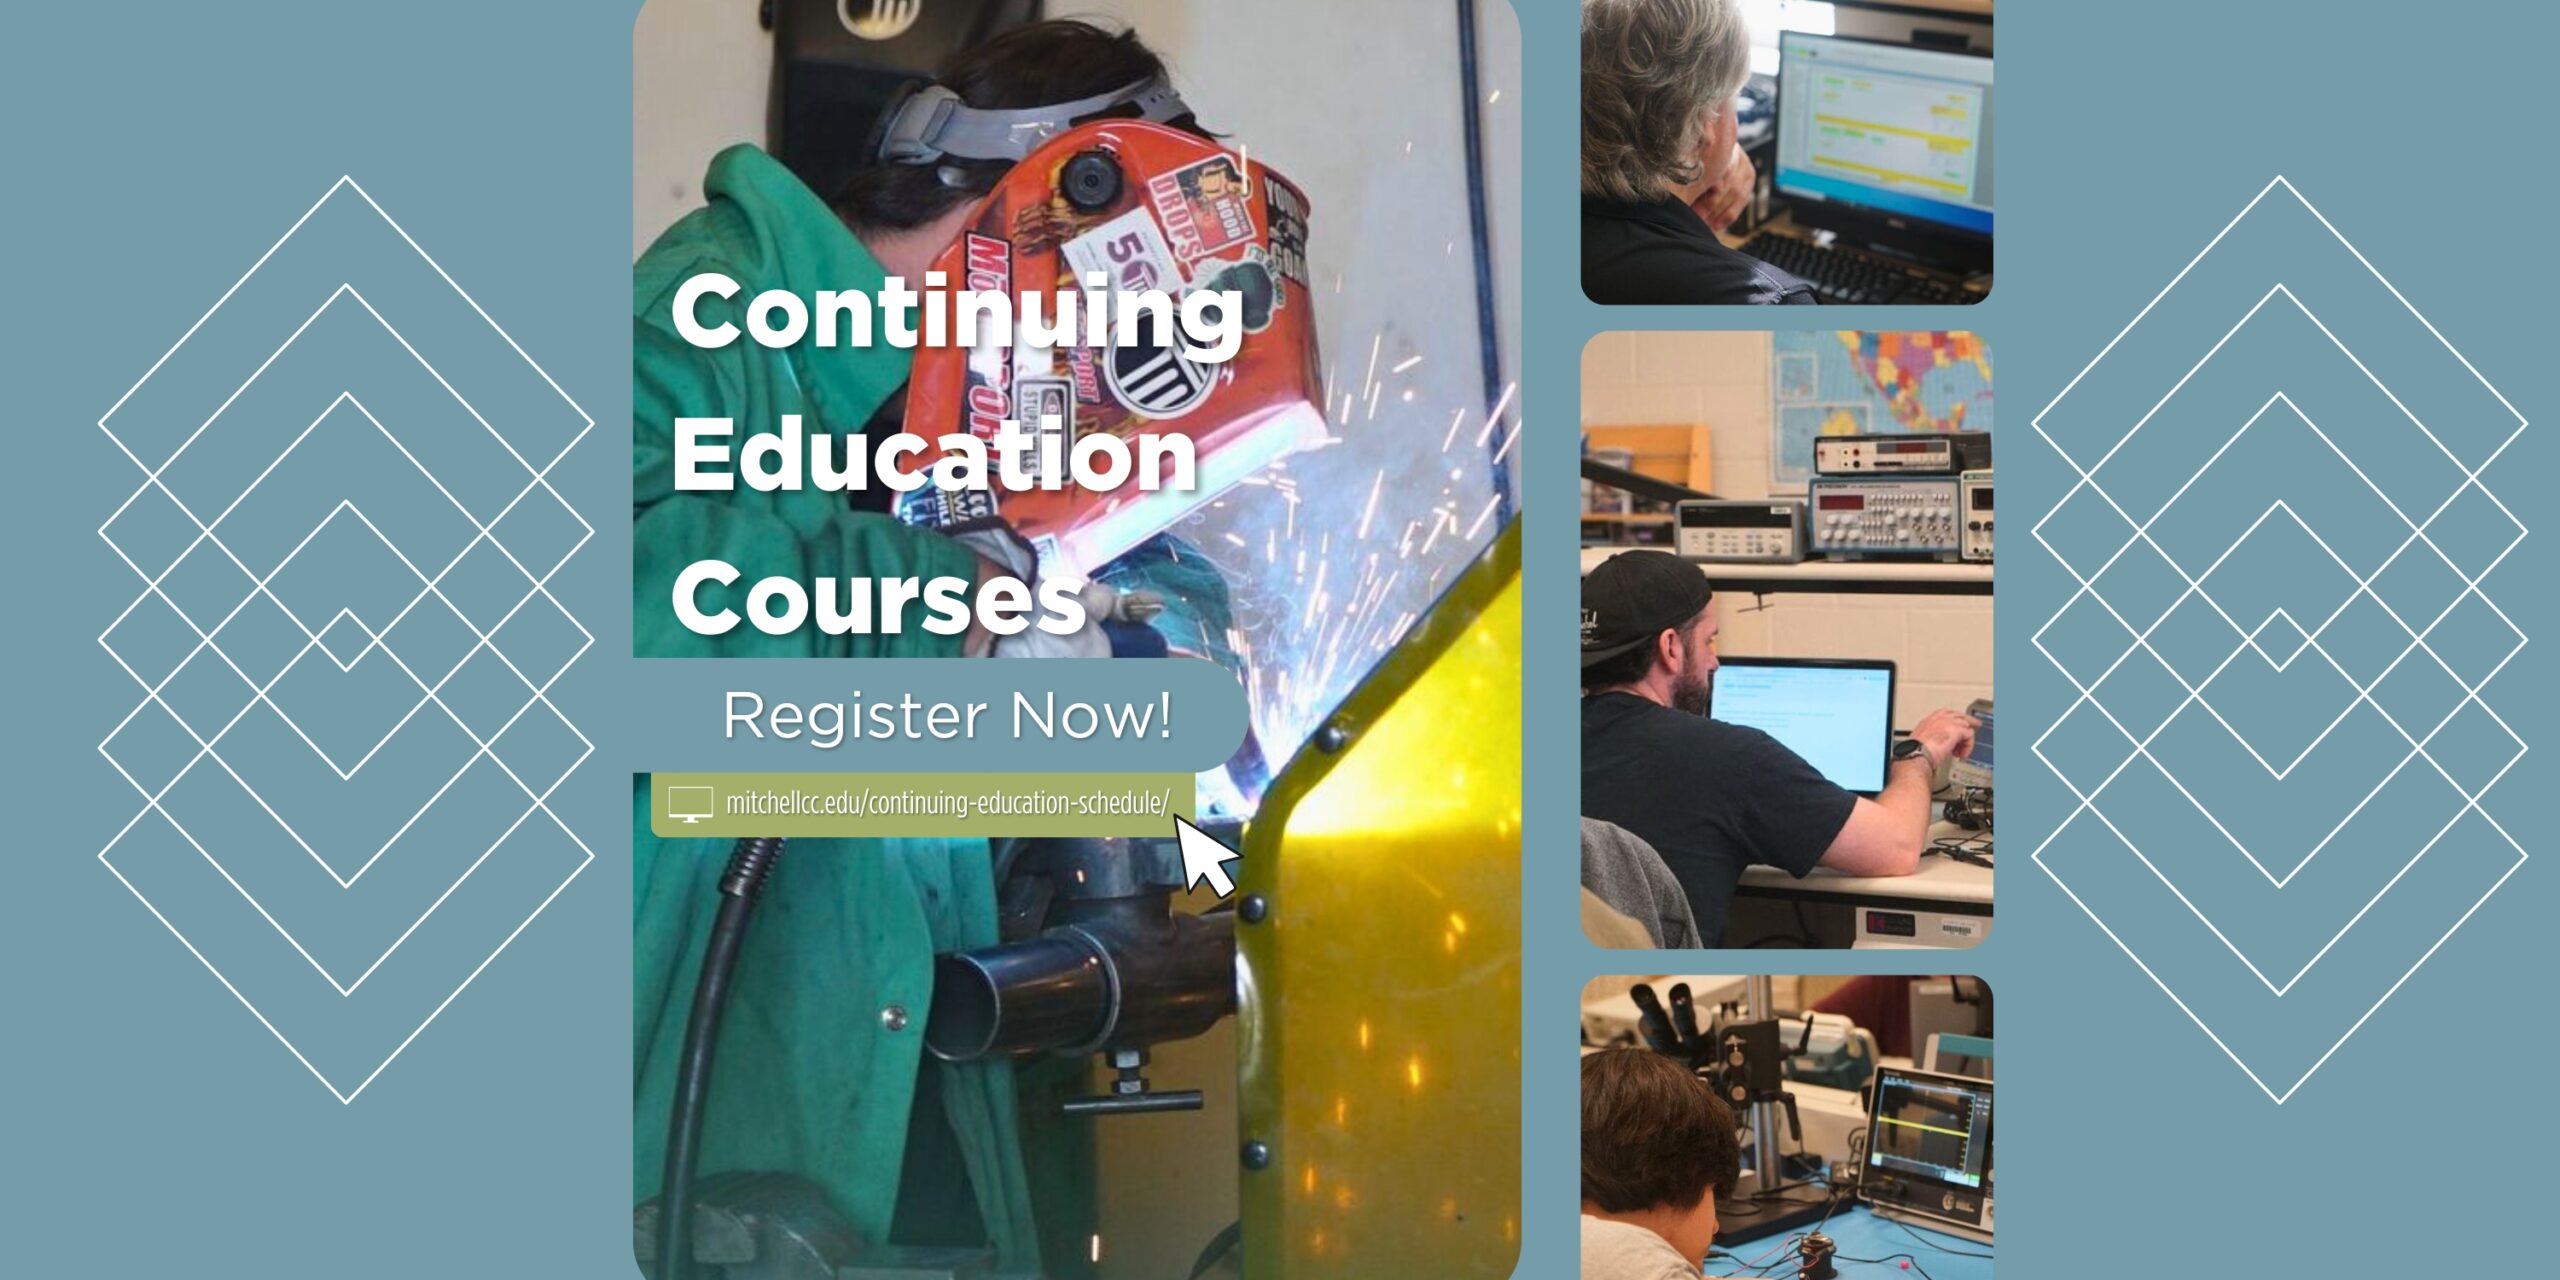 Banner that reads "Continuing Education Courses | Register Now | mitchellcc.edu/continuing-education-schedule/". Click the banner for more info.